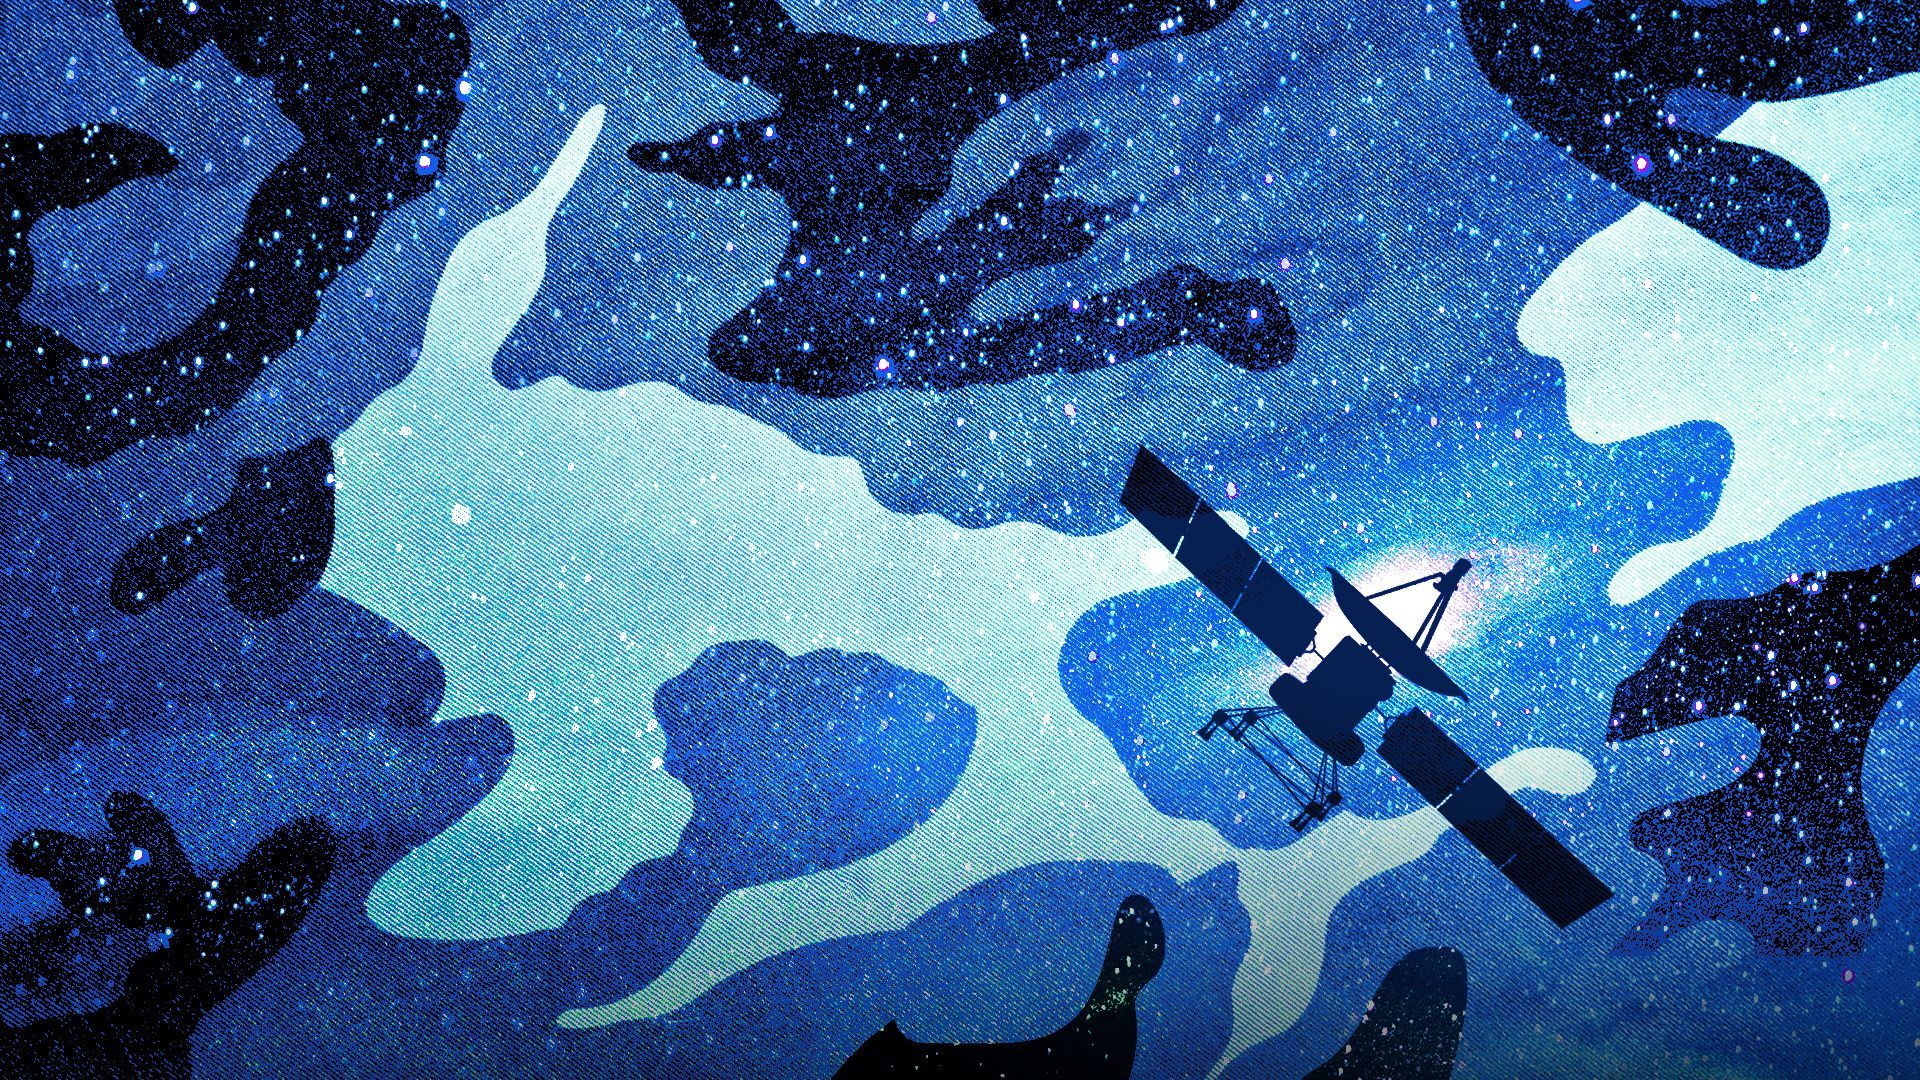 Illustration of camouflage fabric with stars and a galaxy showing through the darkest shapes of the pattern. In the foreground is a satellite. 